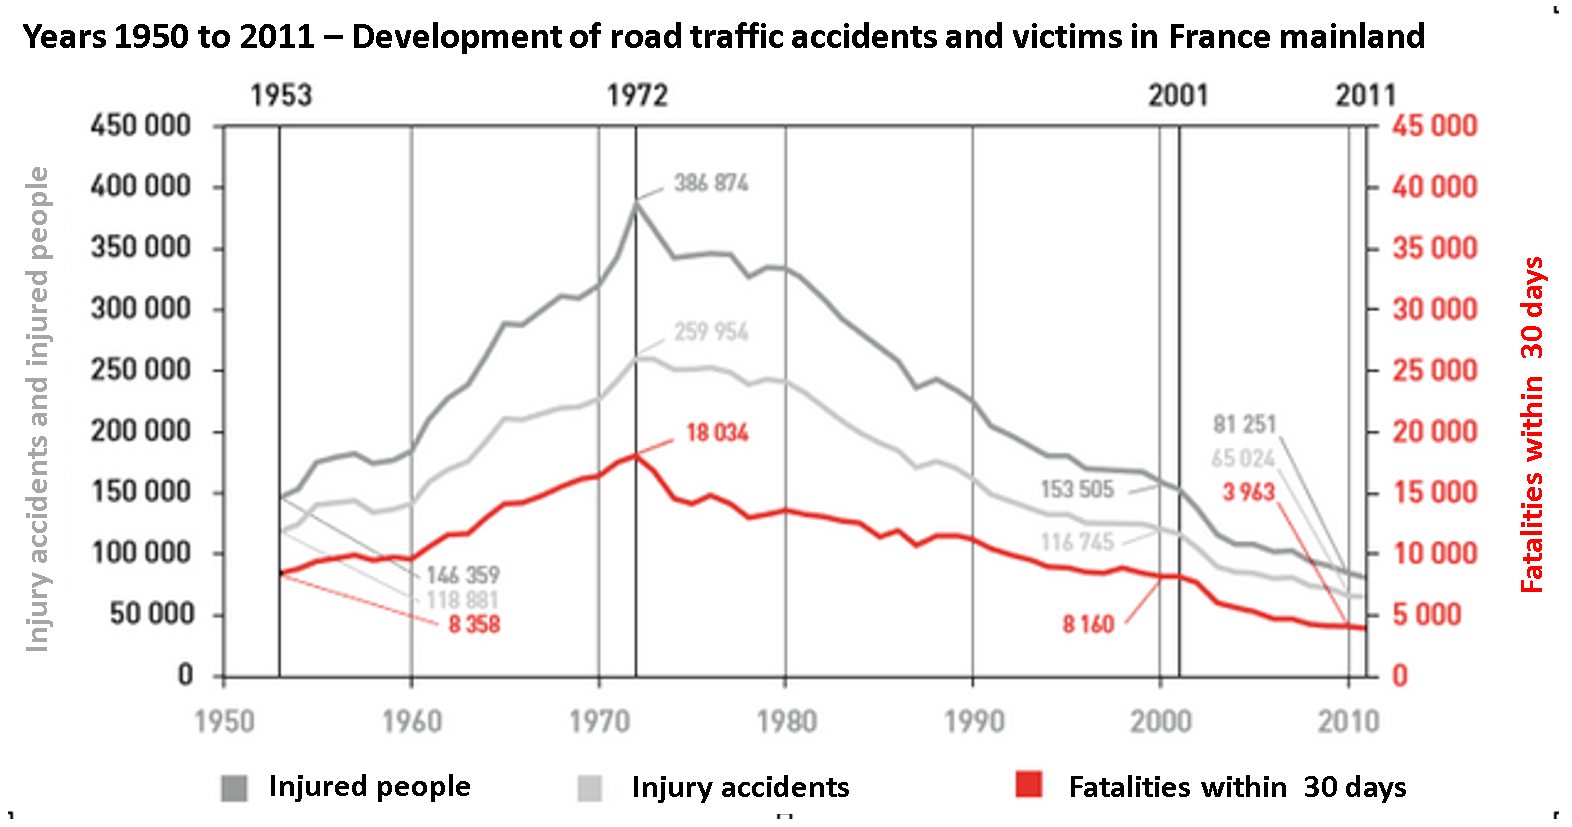 1950-2011 development of road traffic crashes and injuries